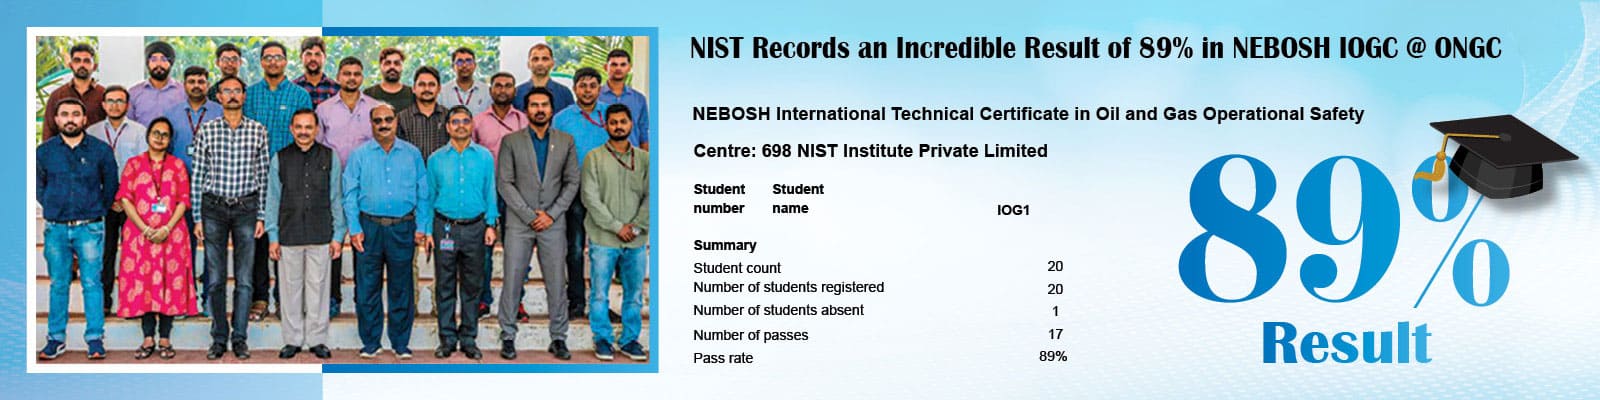 nist-achieved-89-results-in-nebosh-iogc-at-ongc